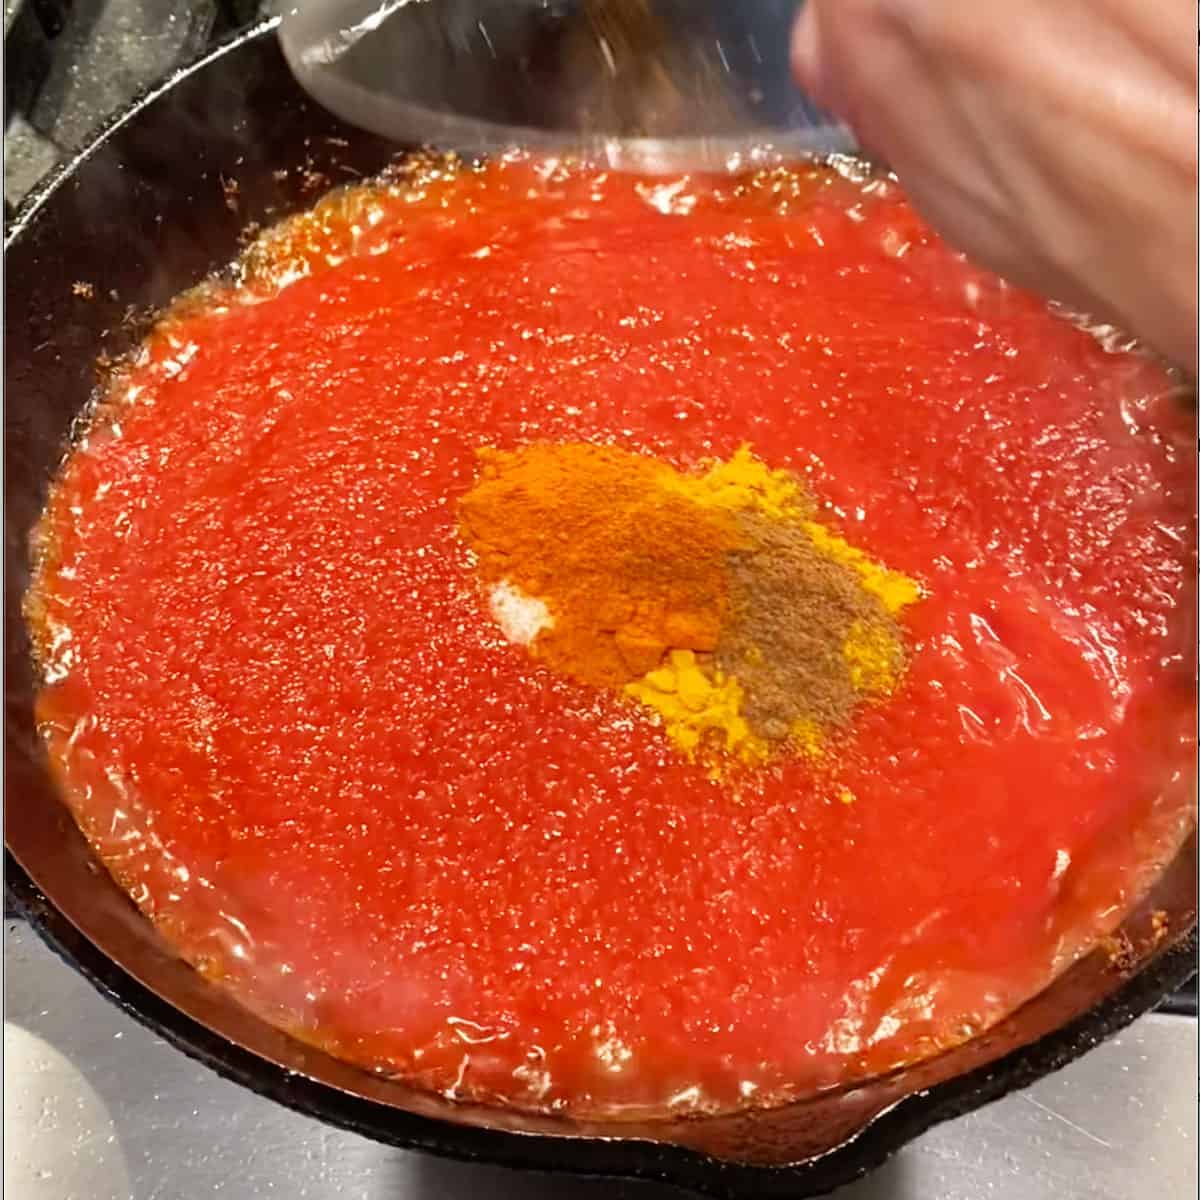 tomato sauce in a cast iron skillet with assorted spices in the center.